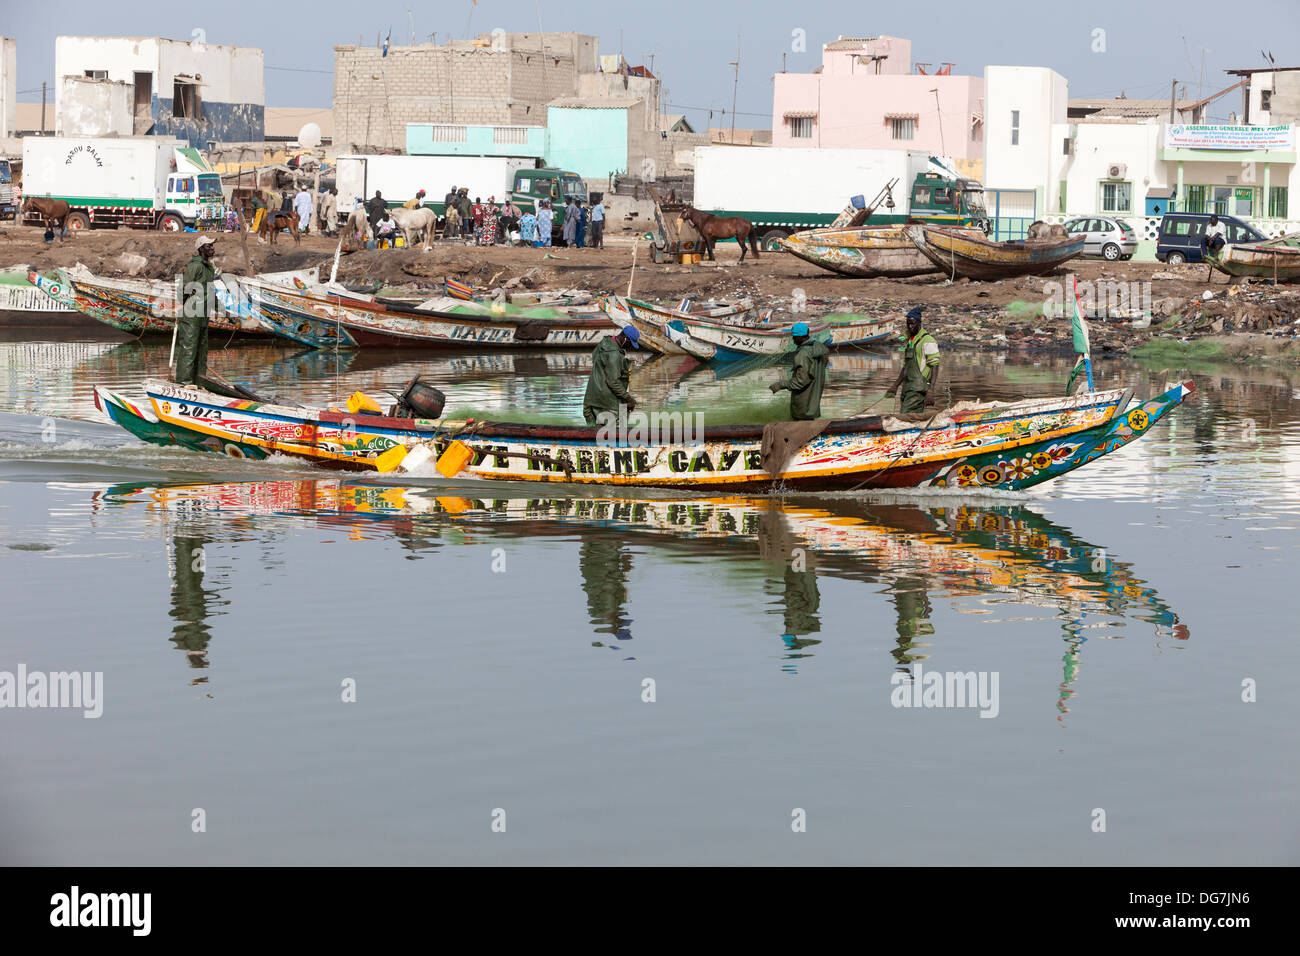 Senegal, Saint Louis. Fishermen Head to Sea while Refrigerated Trucks Line up to Carry Fishermen's Catch to Inland Markets. Stock Photo